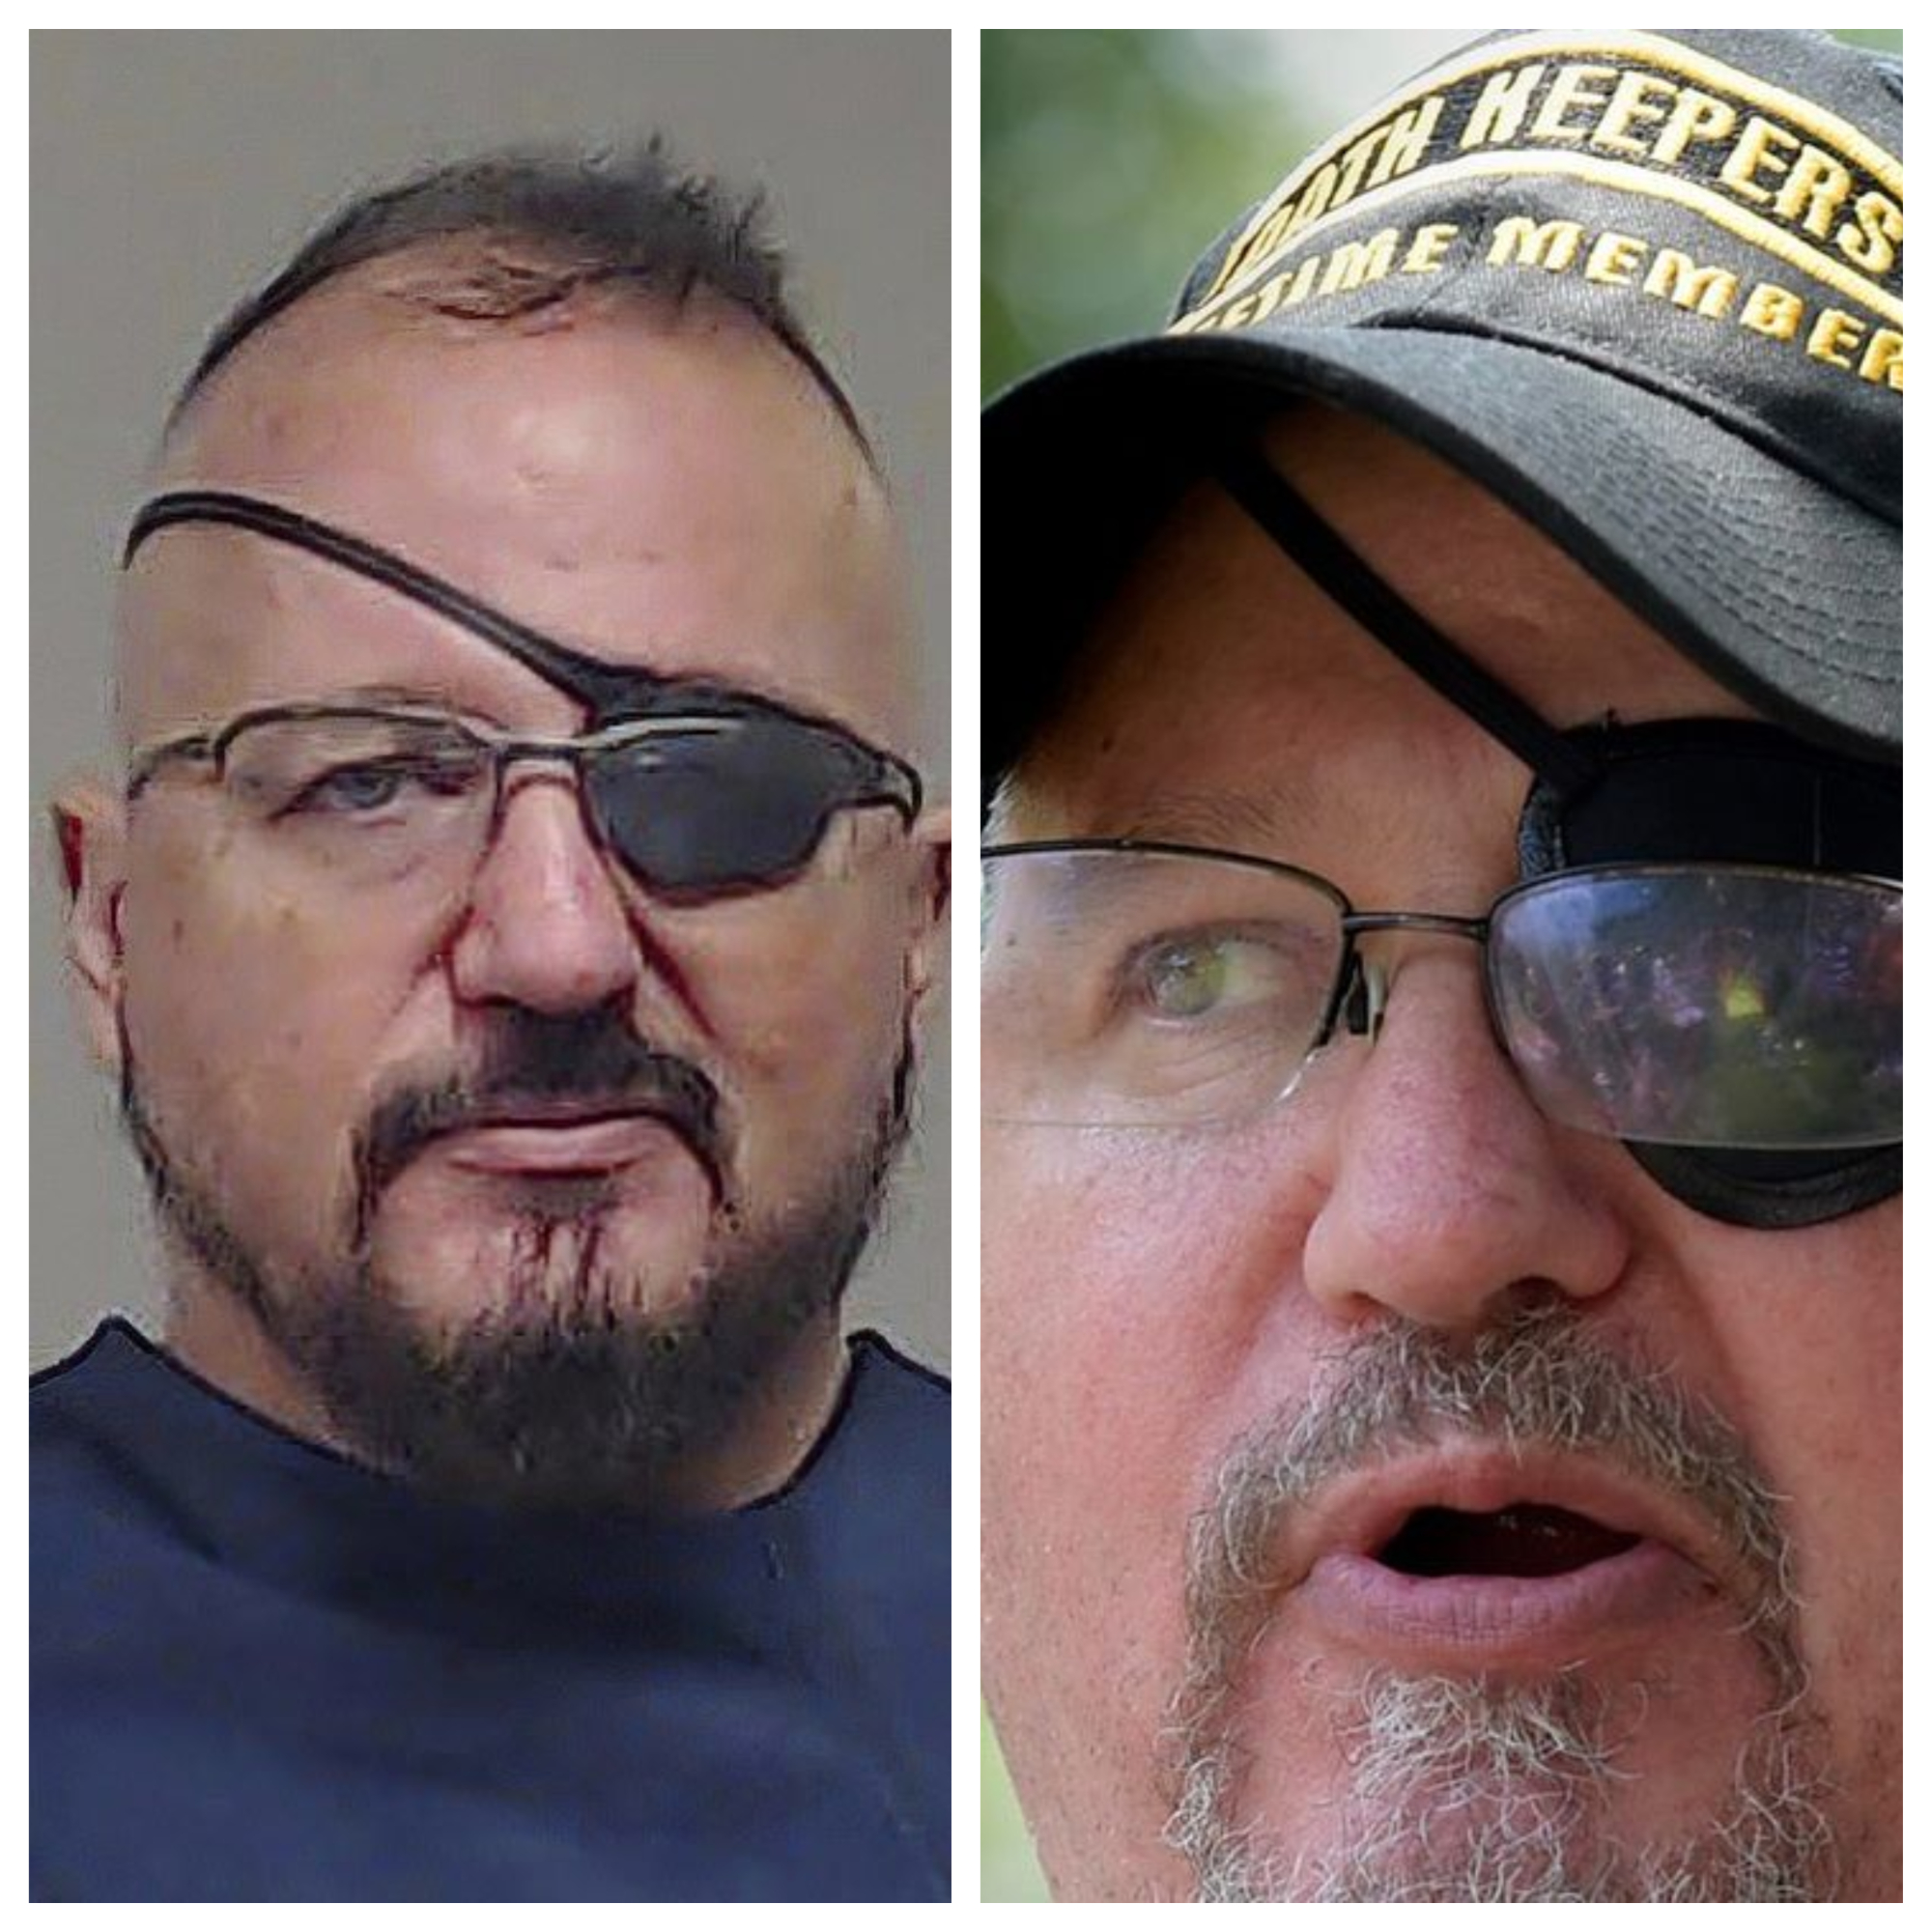 Stewart Rhodes, the leader of the Oath Keepers militia group